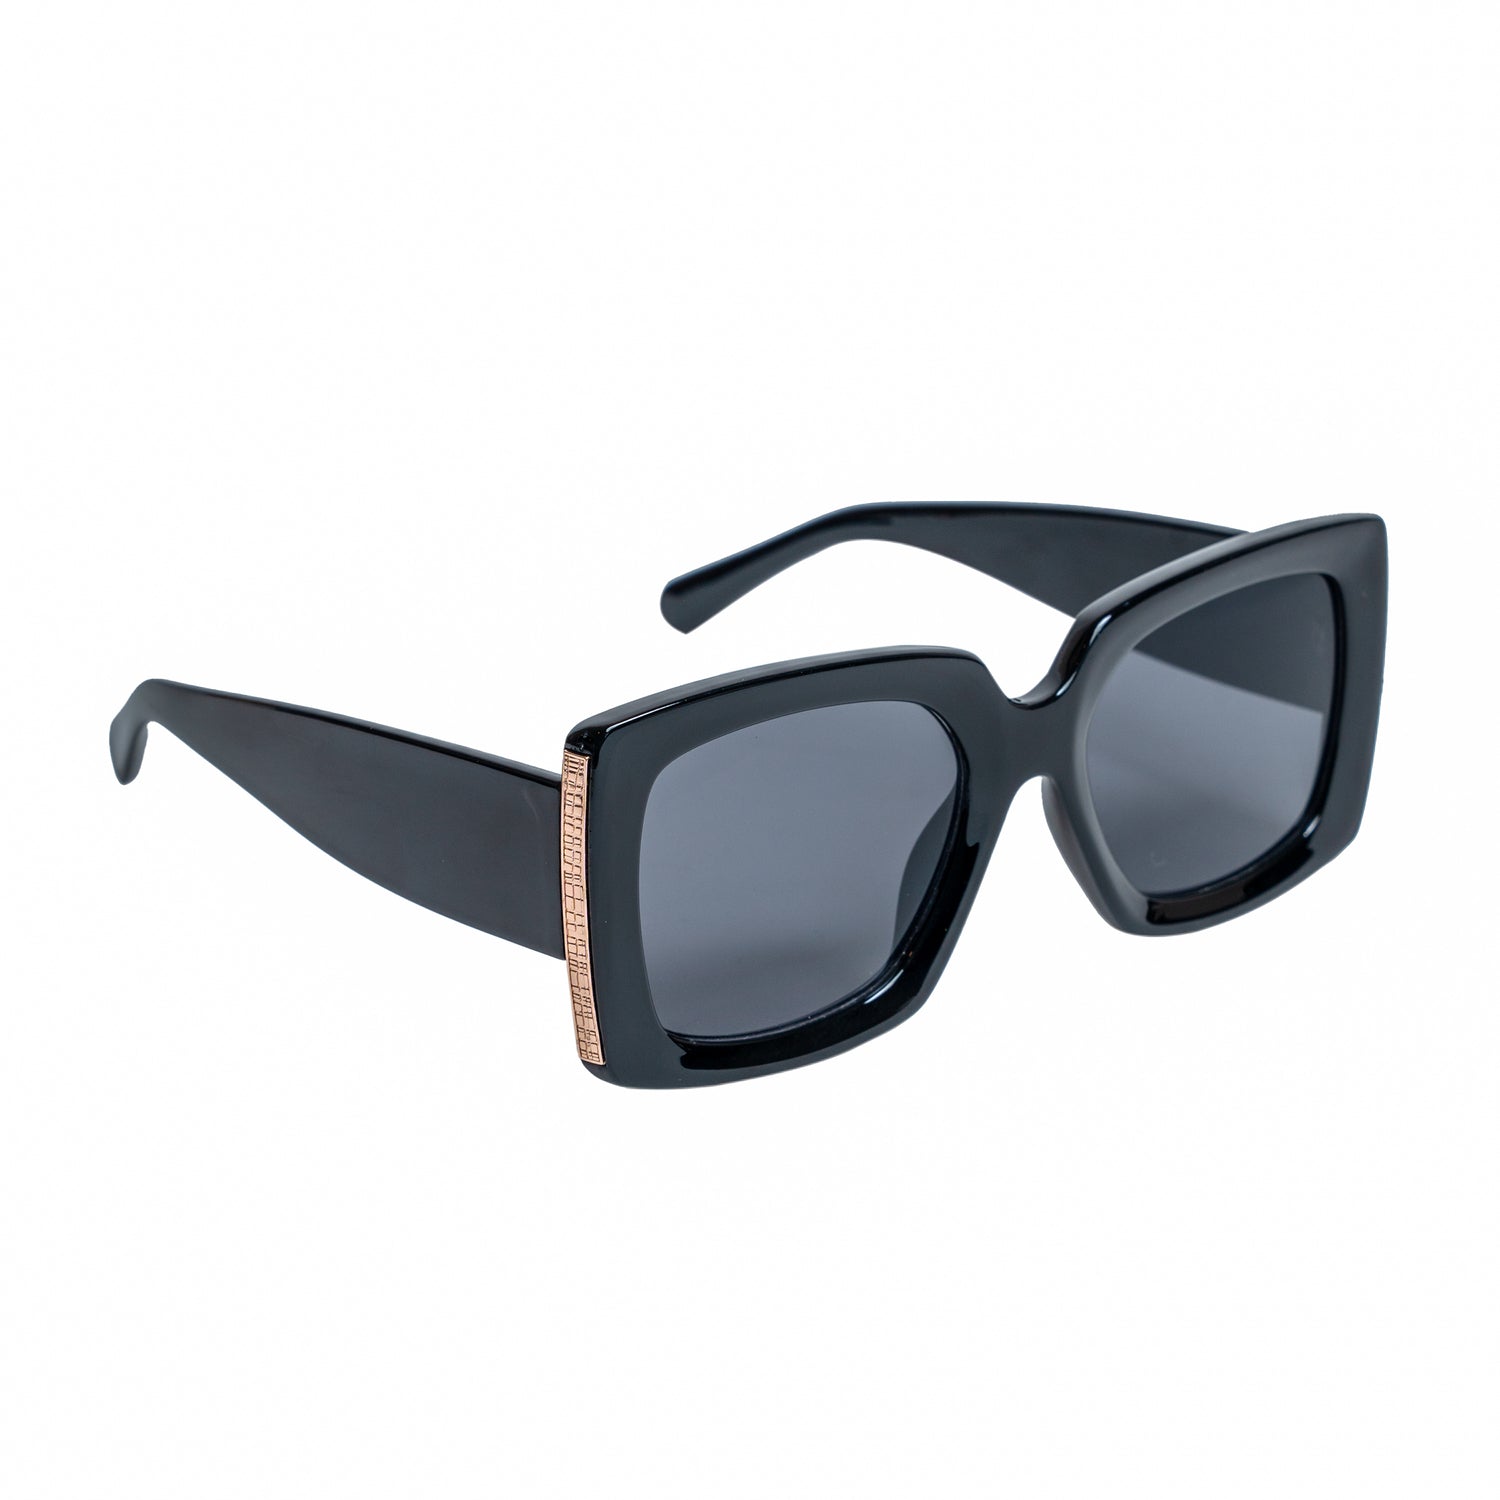 Chokore Vintage Square Lens Thick Sunglasses with UV 400 Protection (Black)